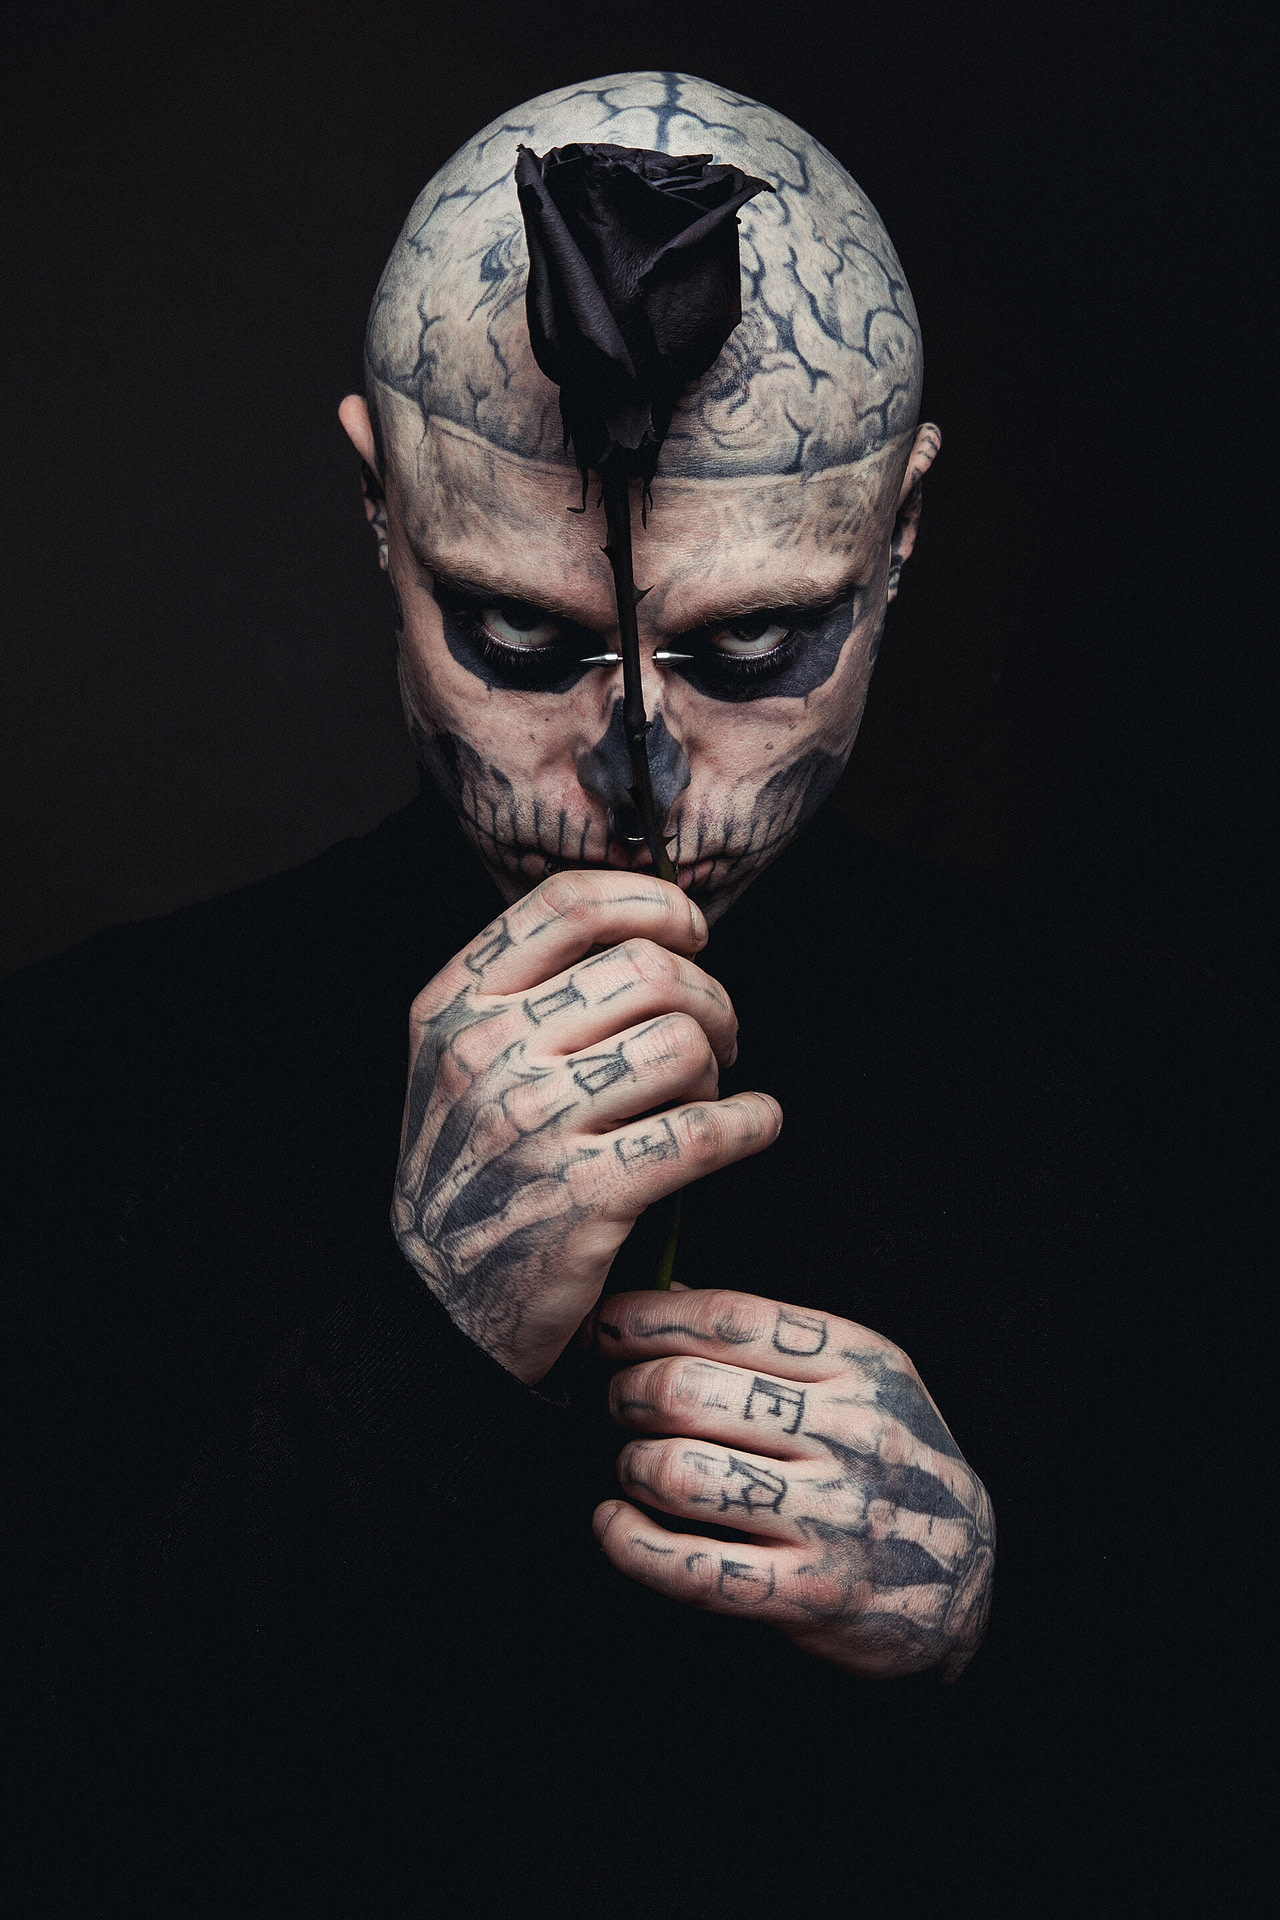 Kevin Millet and Institut National Art Contemporain announce their first collaboration, featuring the late Zombie Boy